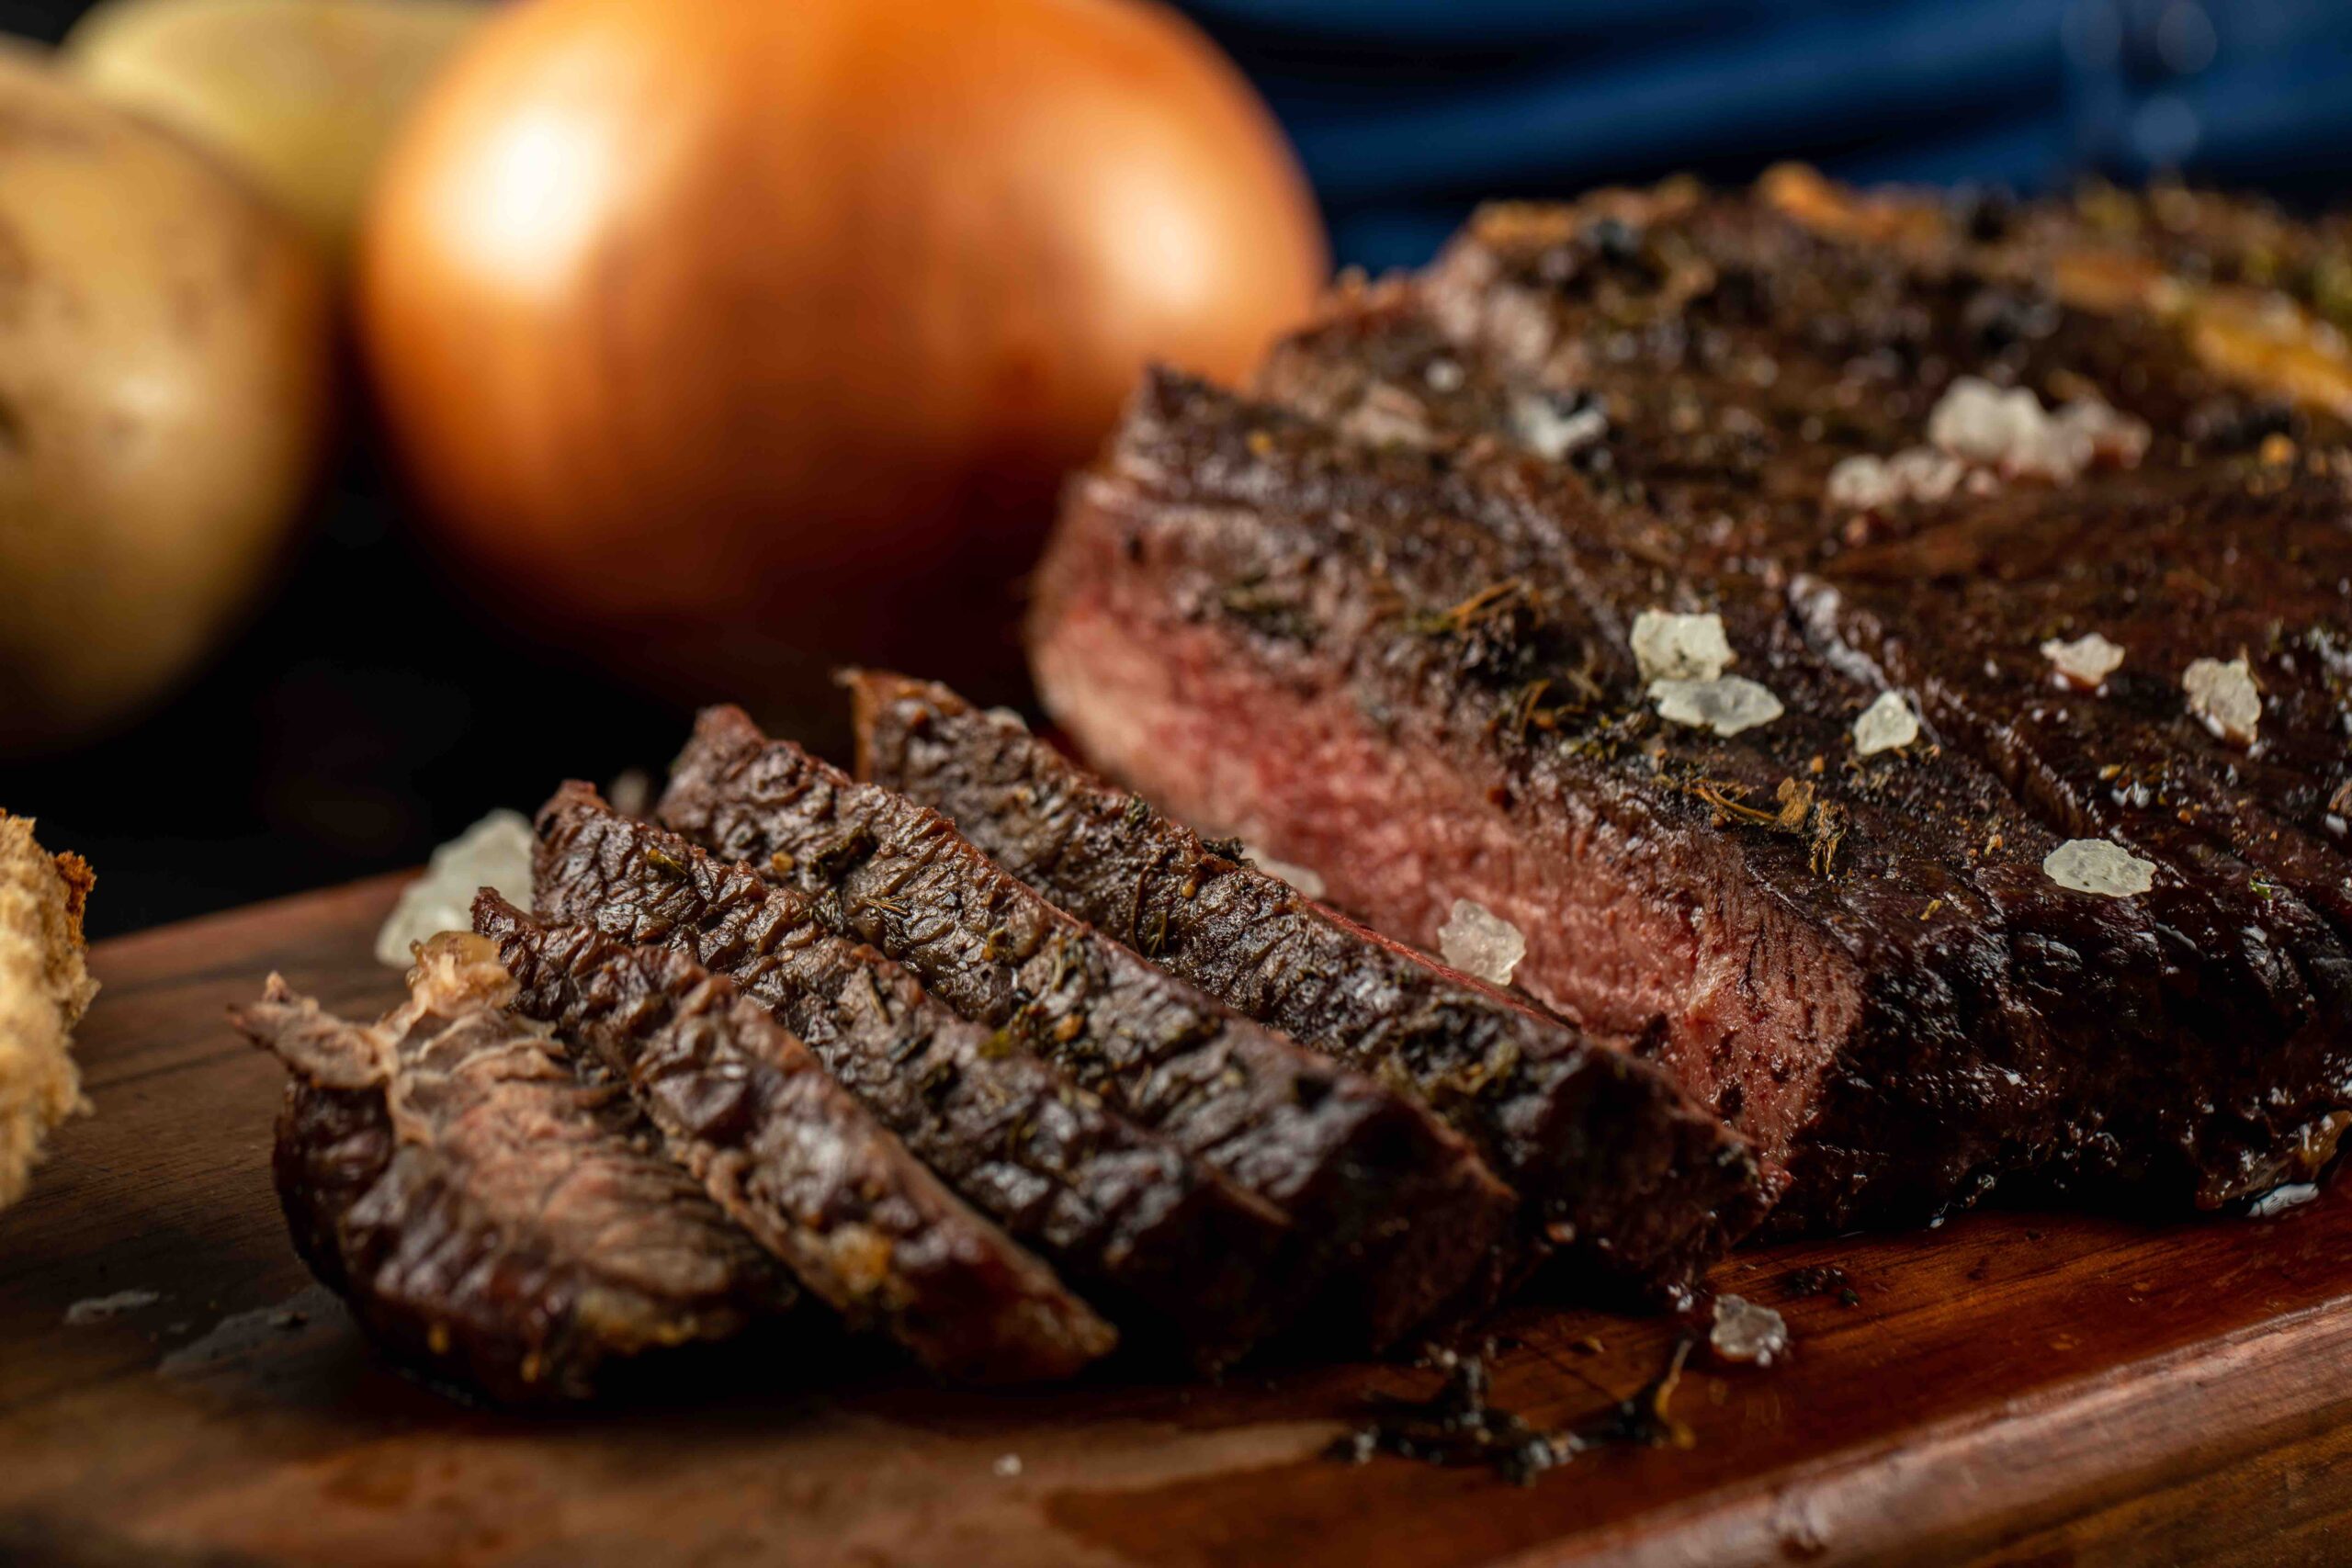 Nutrients for athletes: Red meat is a good source of iron 